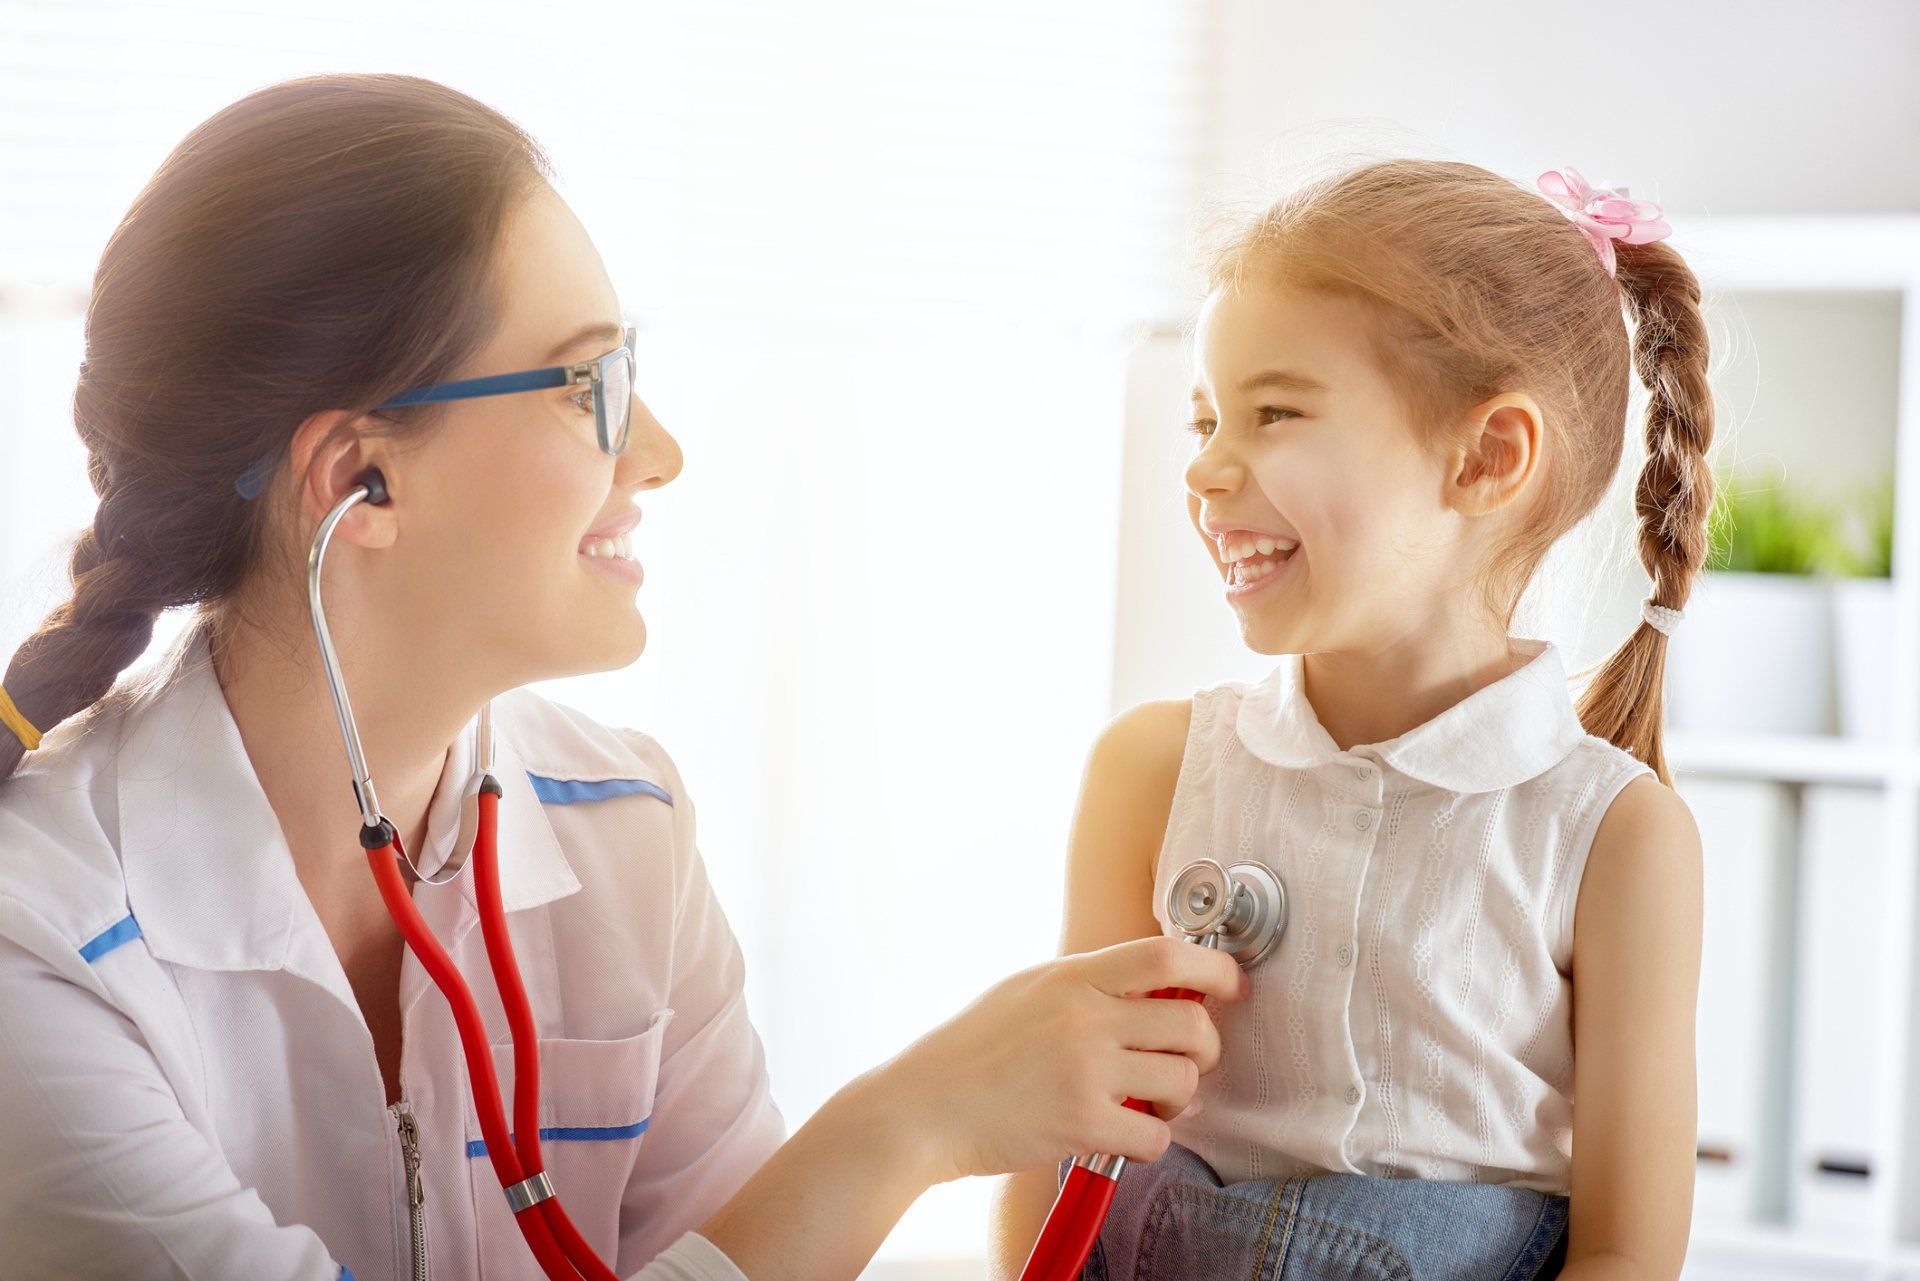 Doctor with a stethoscope | Urgent Care Services in Henrietta, NY